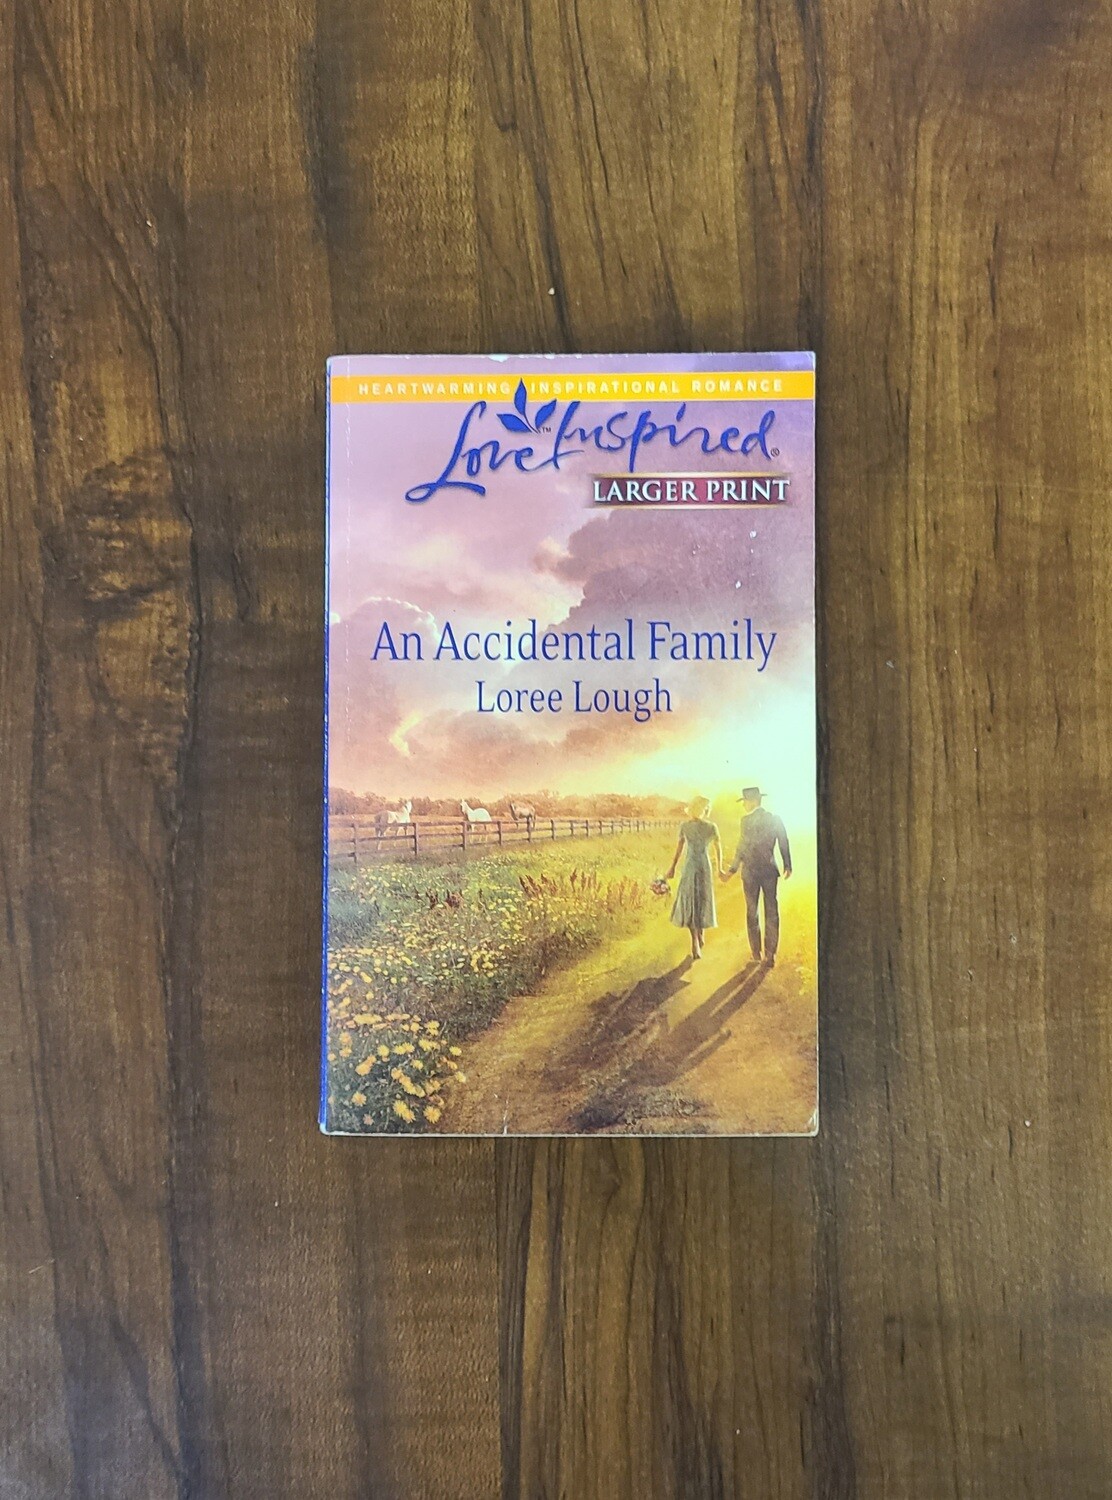 An Accidental Family by Loree Lough